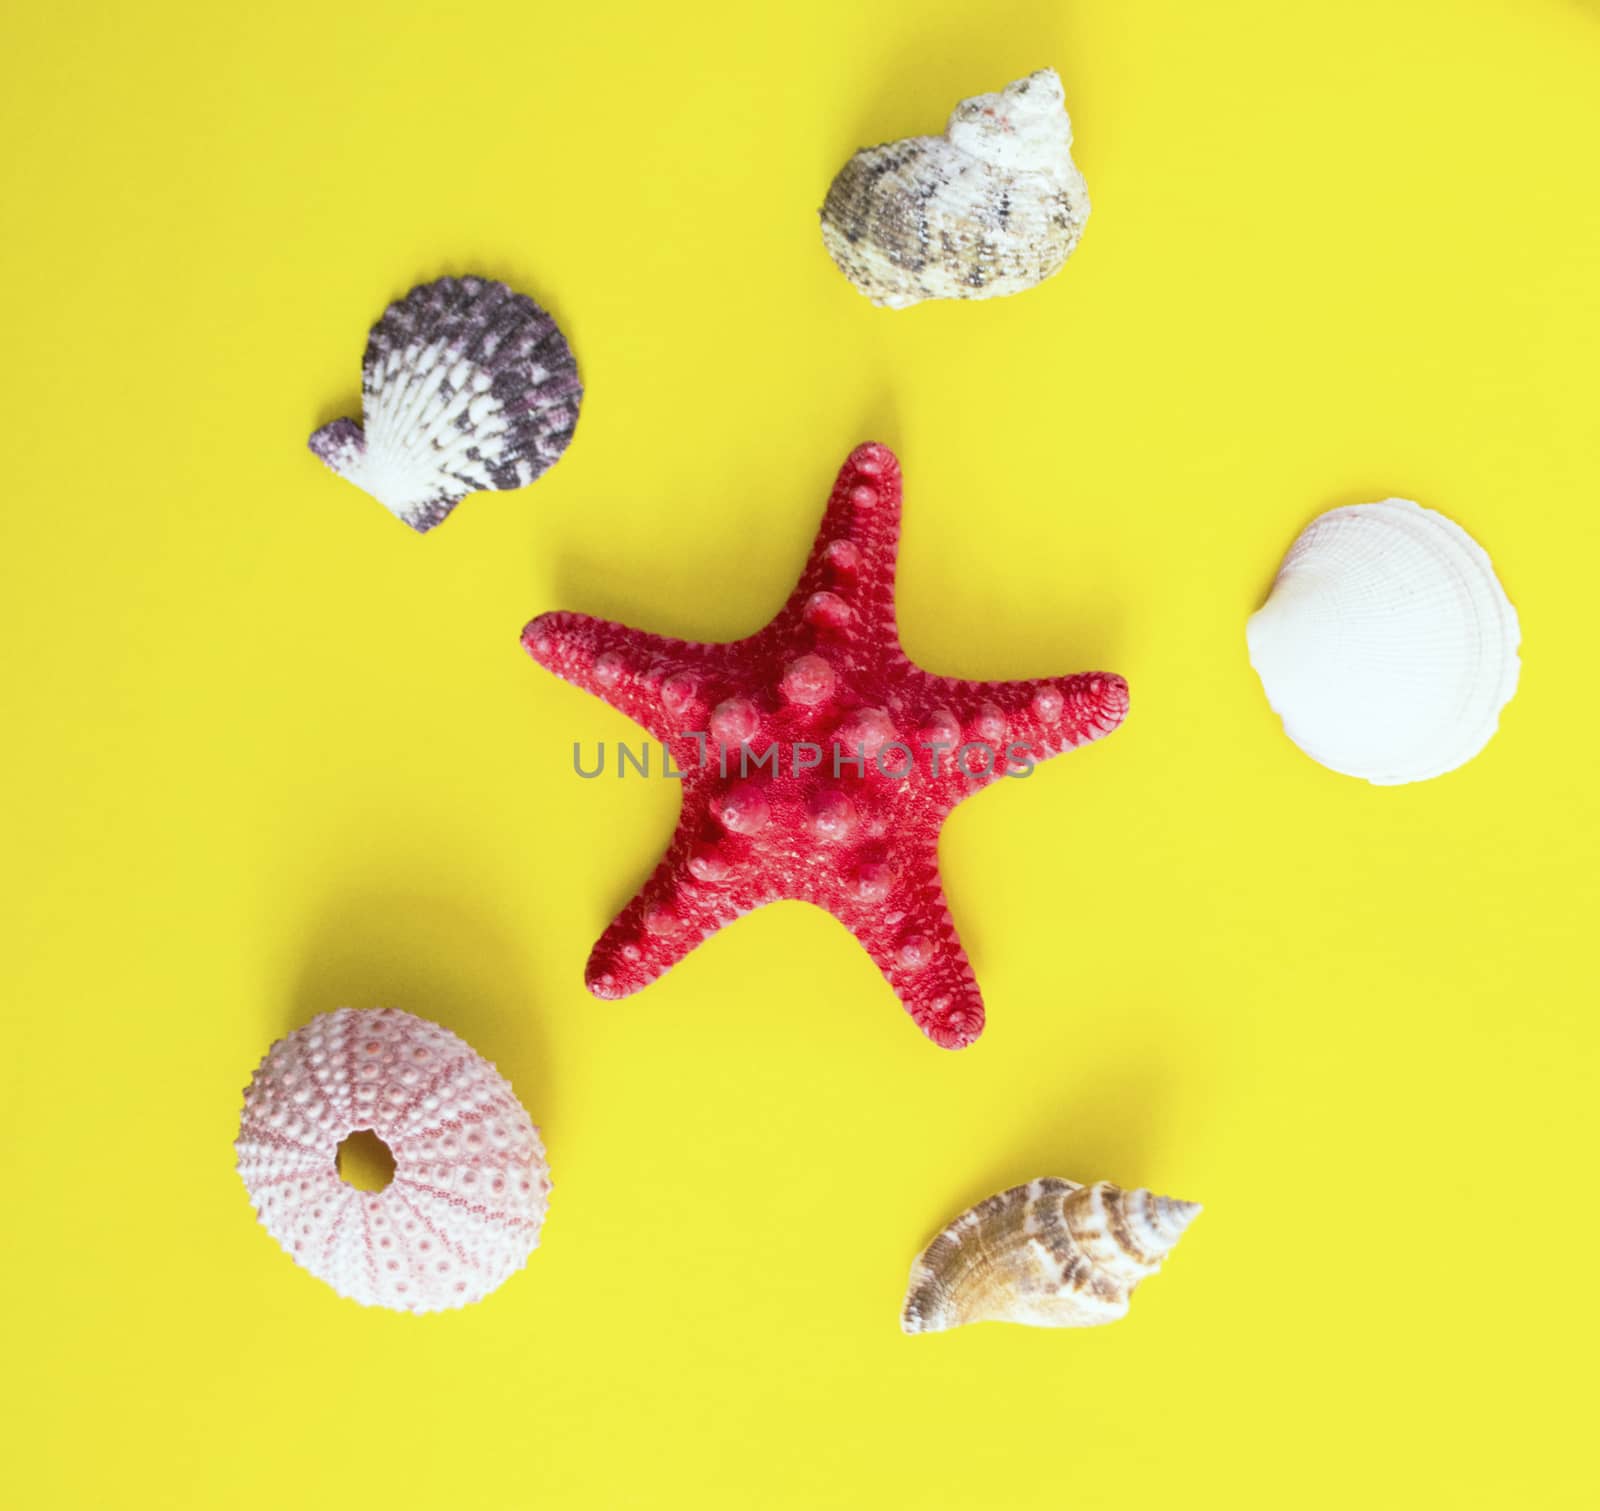 Red starfish and white seashells on yellow background like on the beach